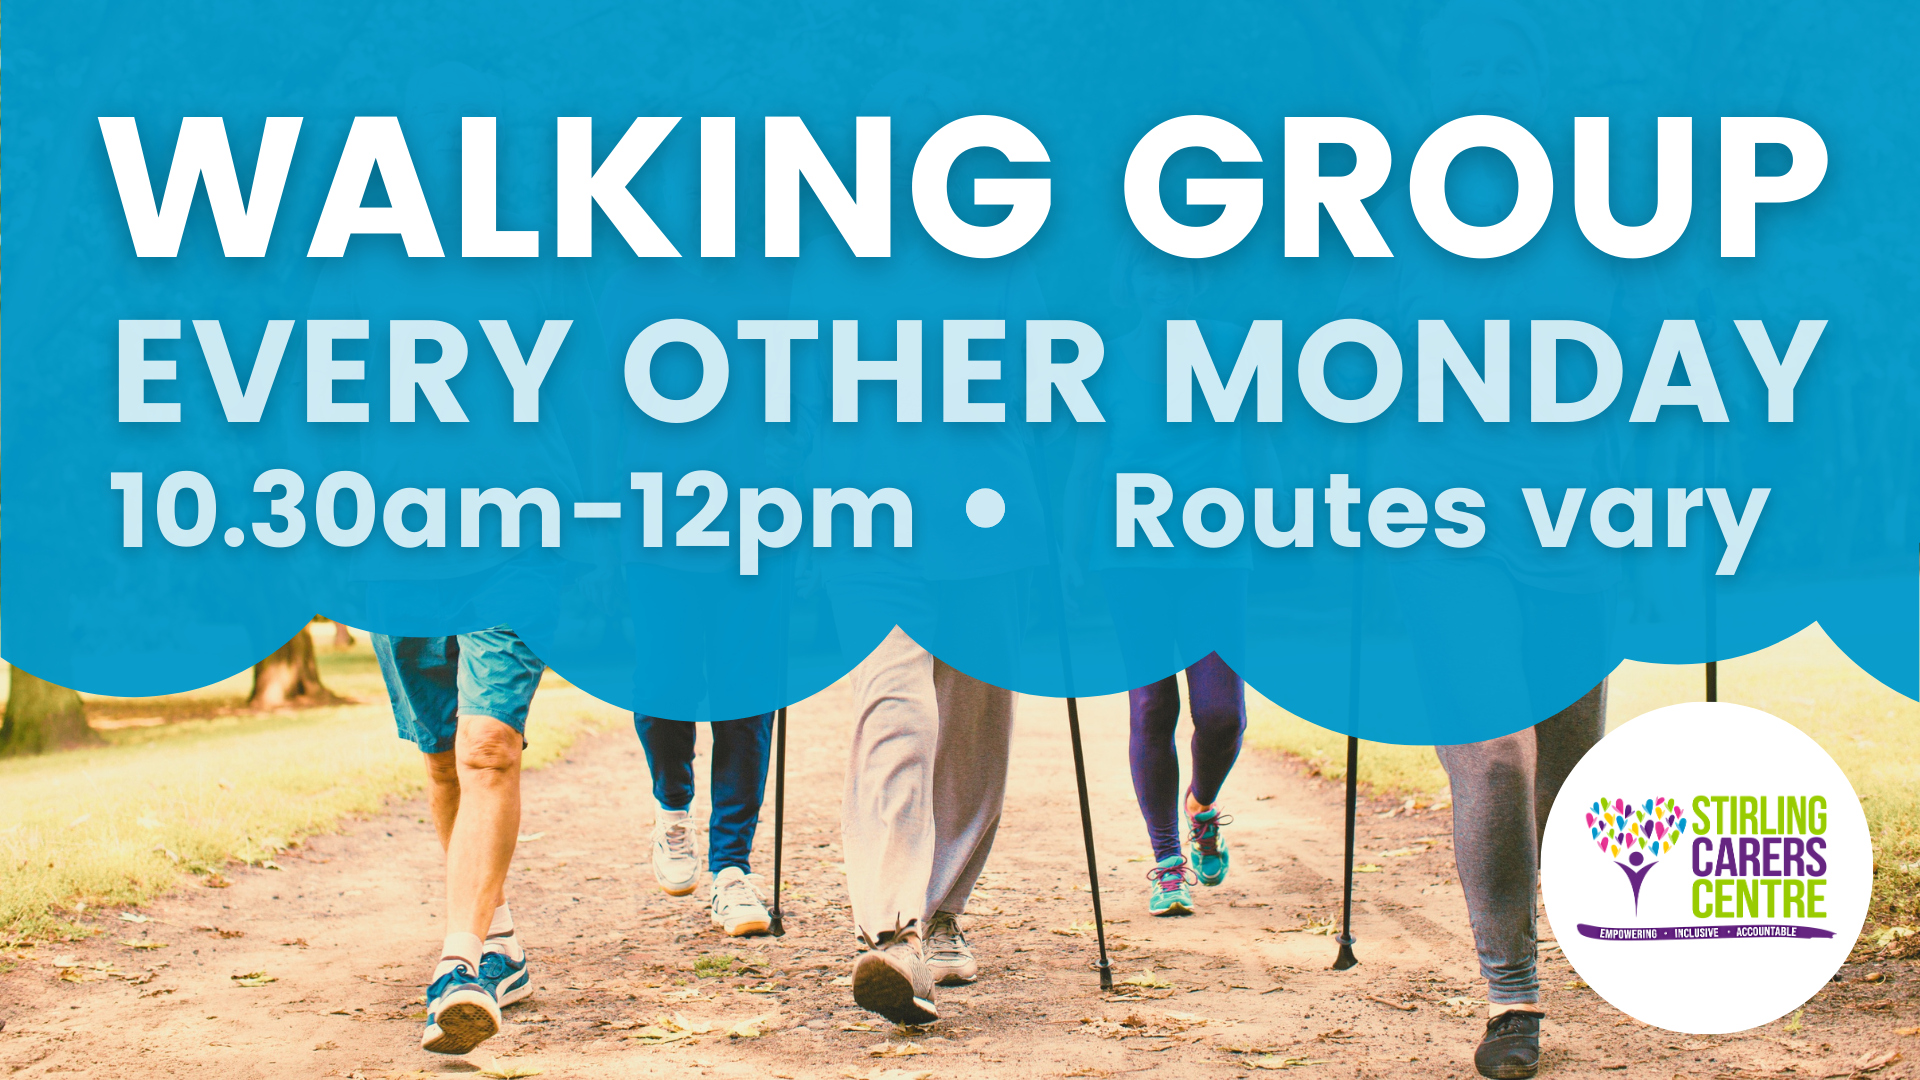 Walking Group advert. Walking Group - every other Monday; 10.30am - 12pm; routes vary.